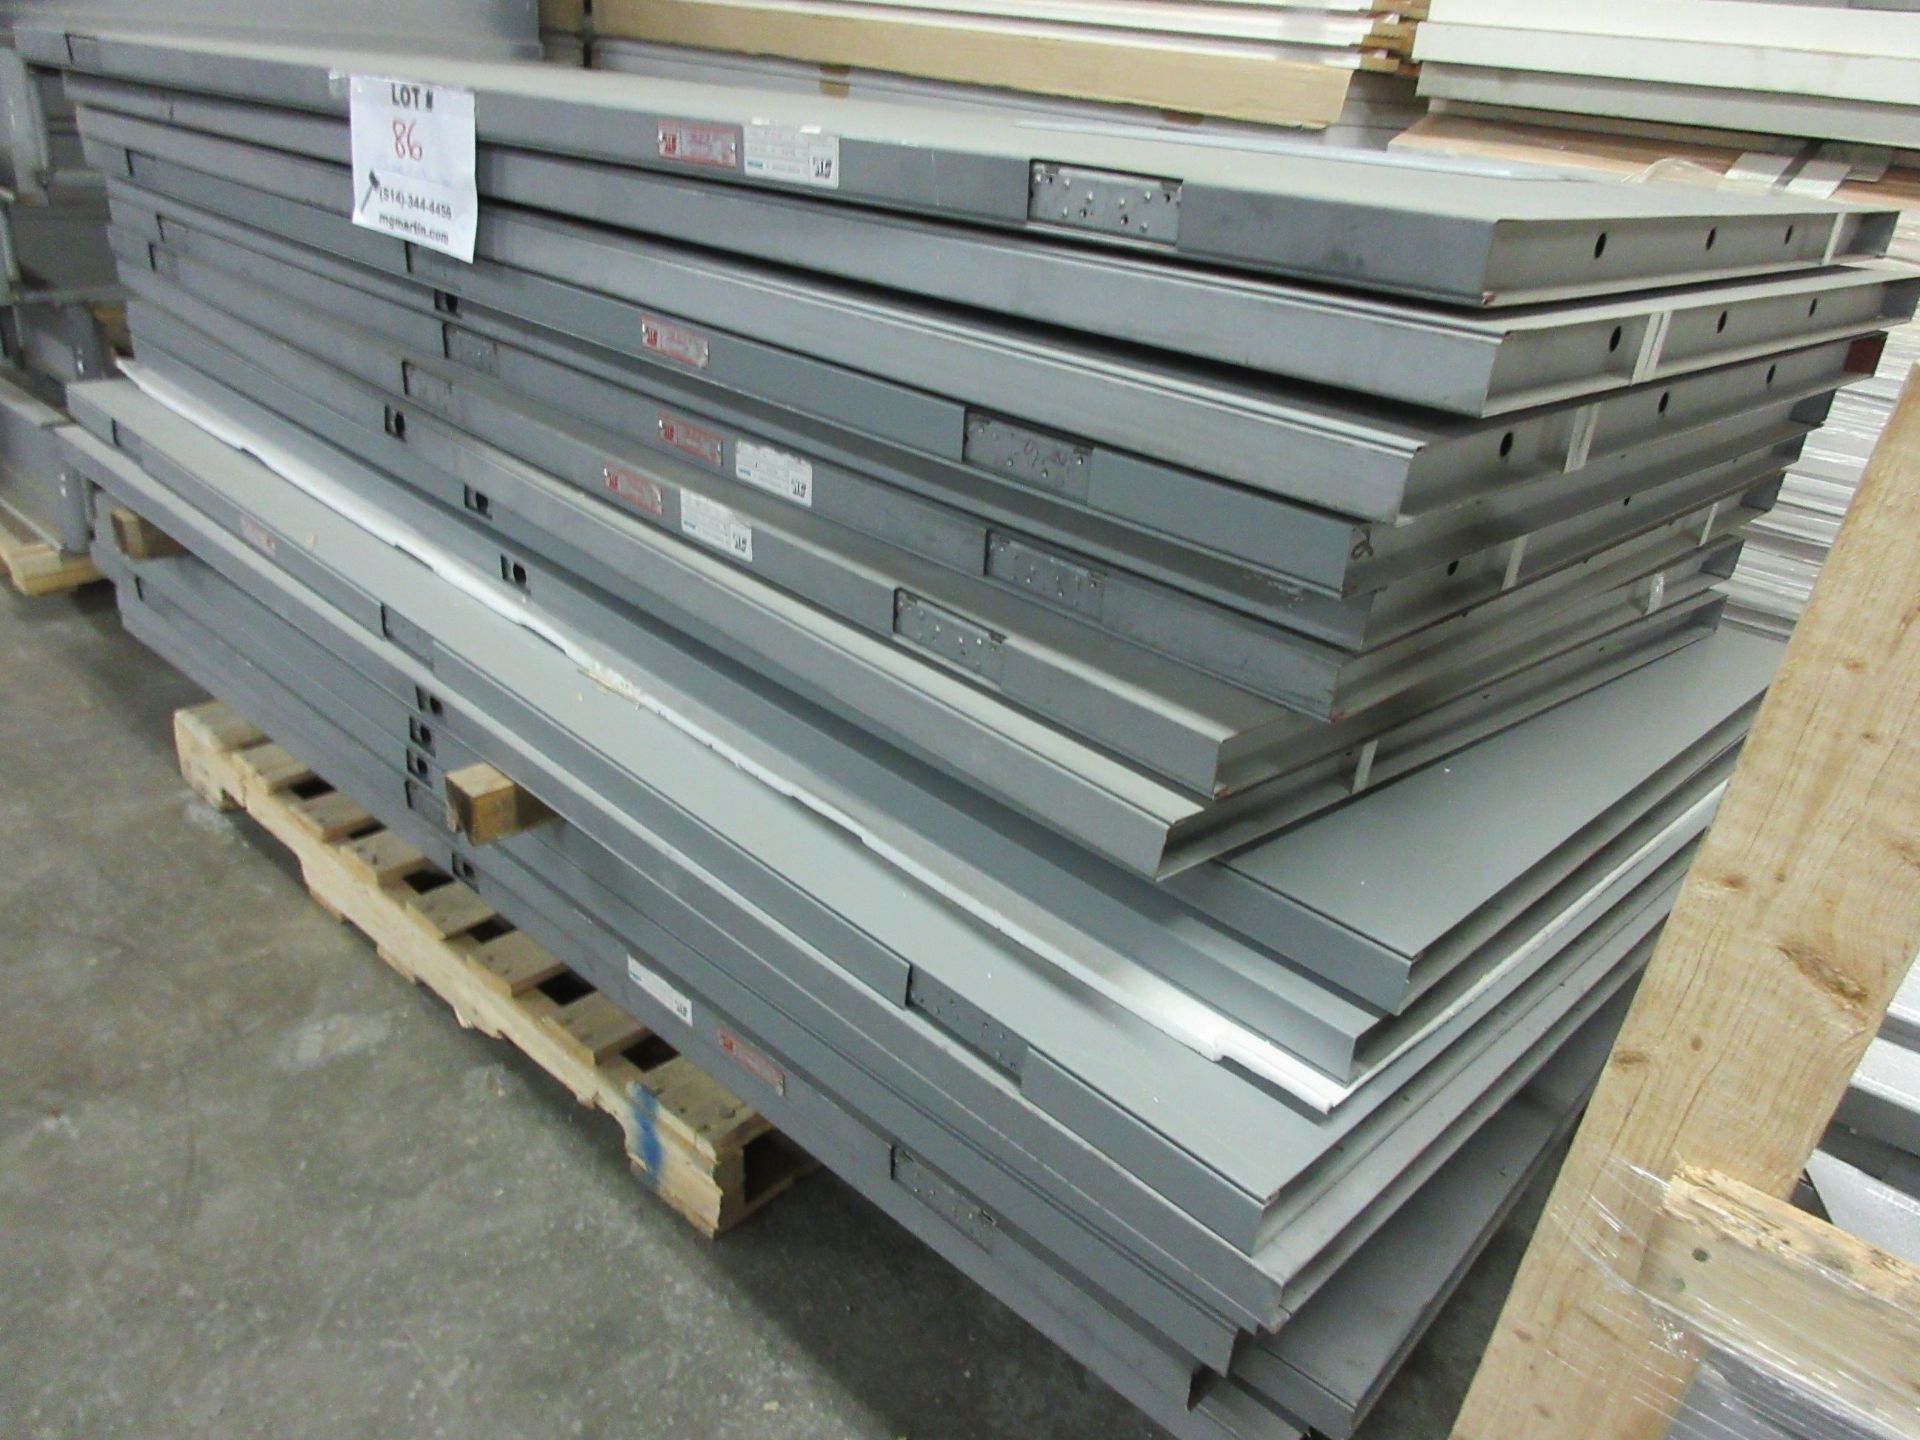 Assorted steel doors fire rated 45 to 90 min for most 34",36" x 83" x 1 3/4" (qty 17) - Image 3 of 4